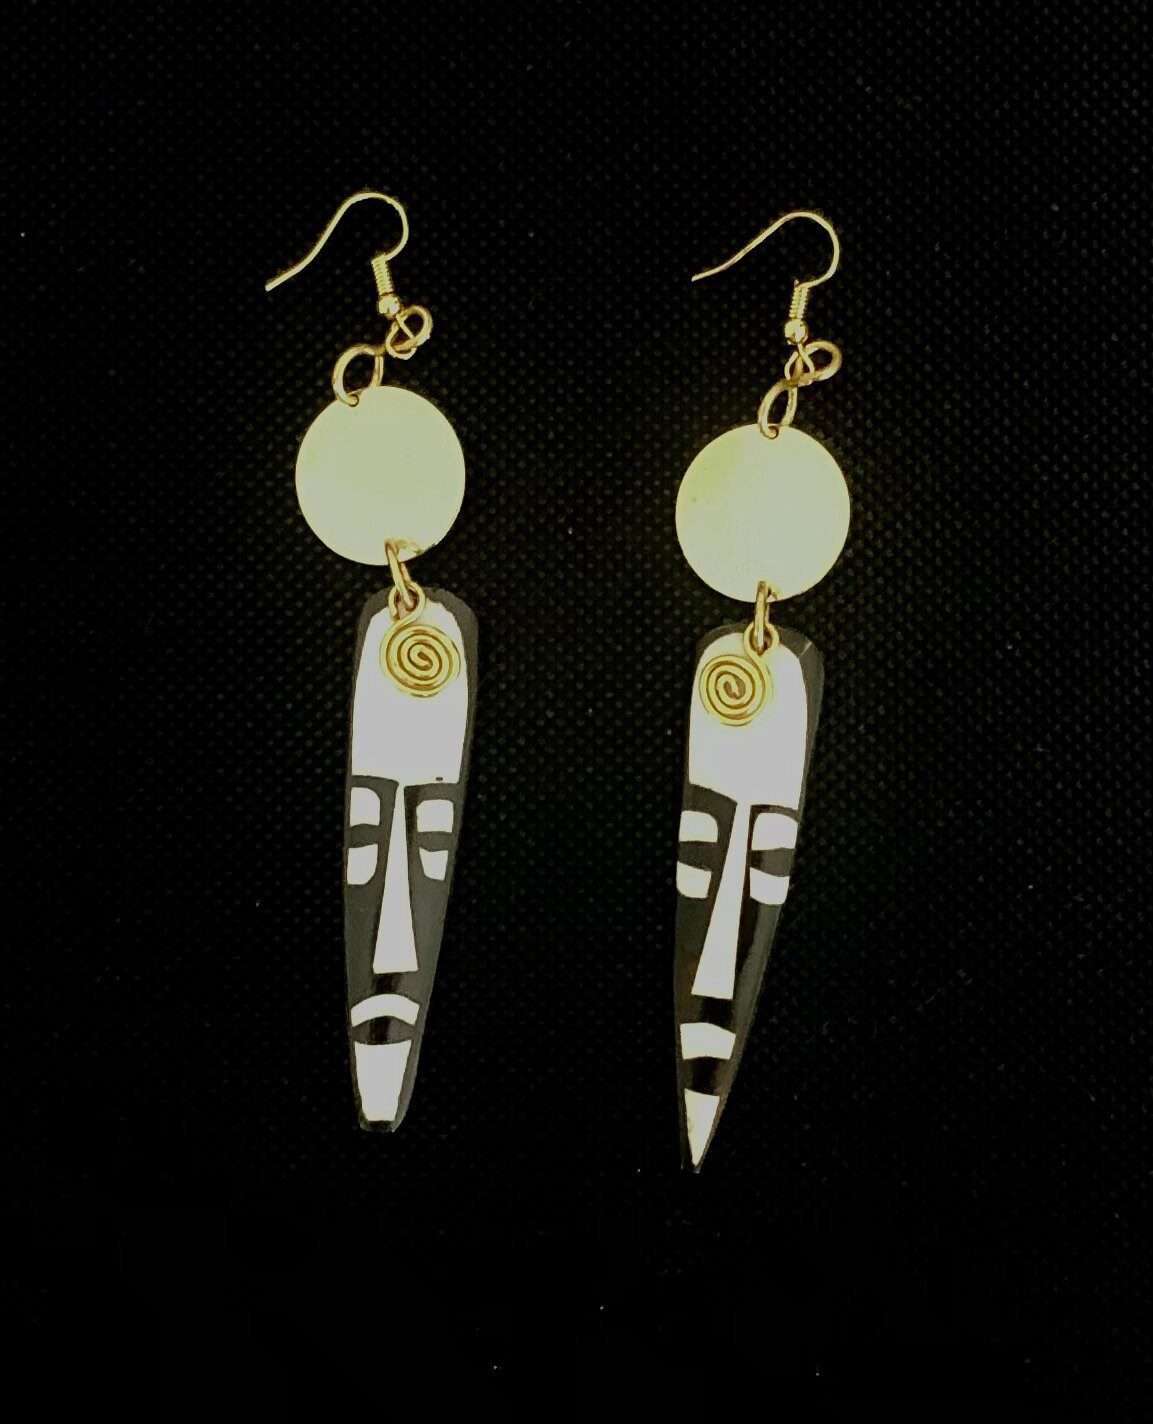 African bone brass earrings with mask face